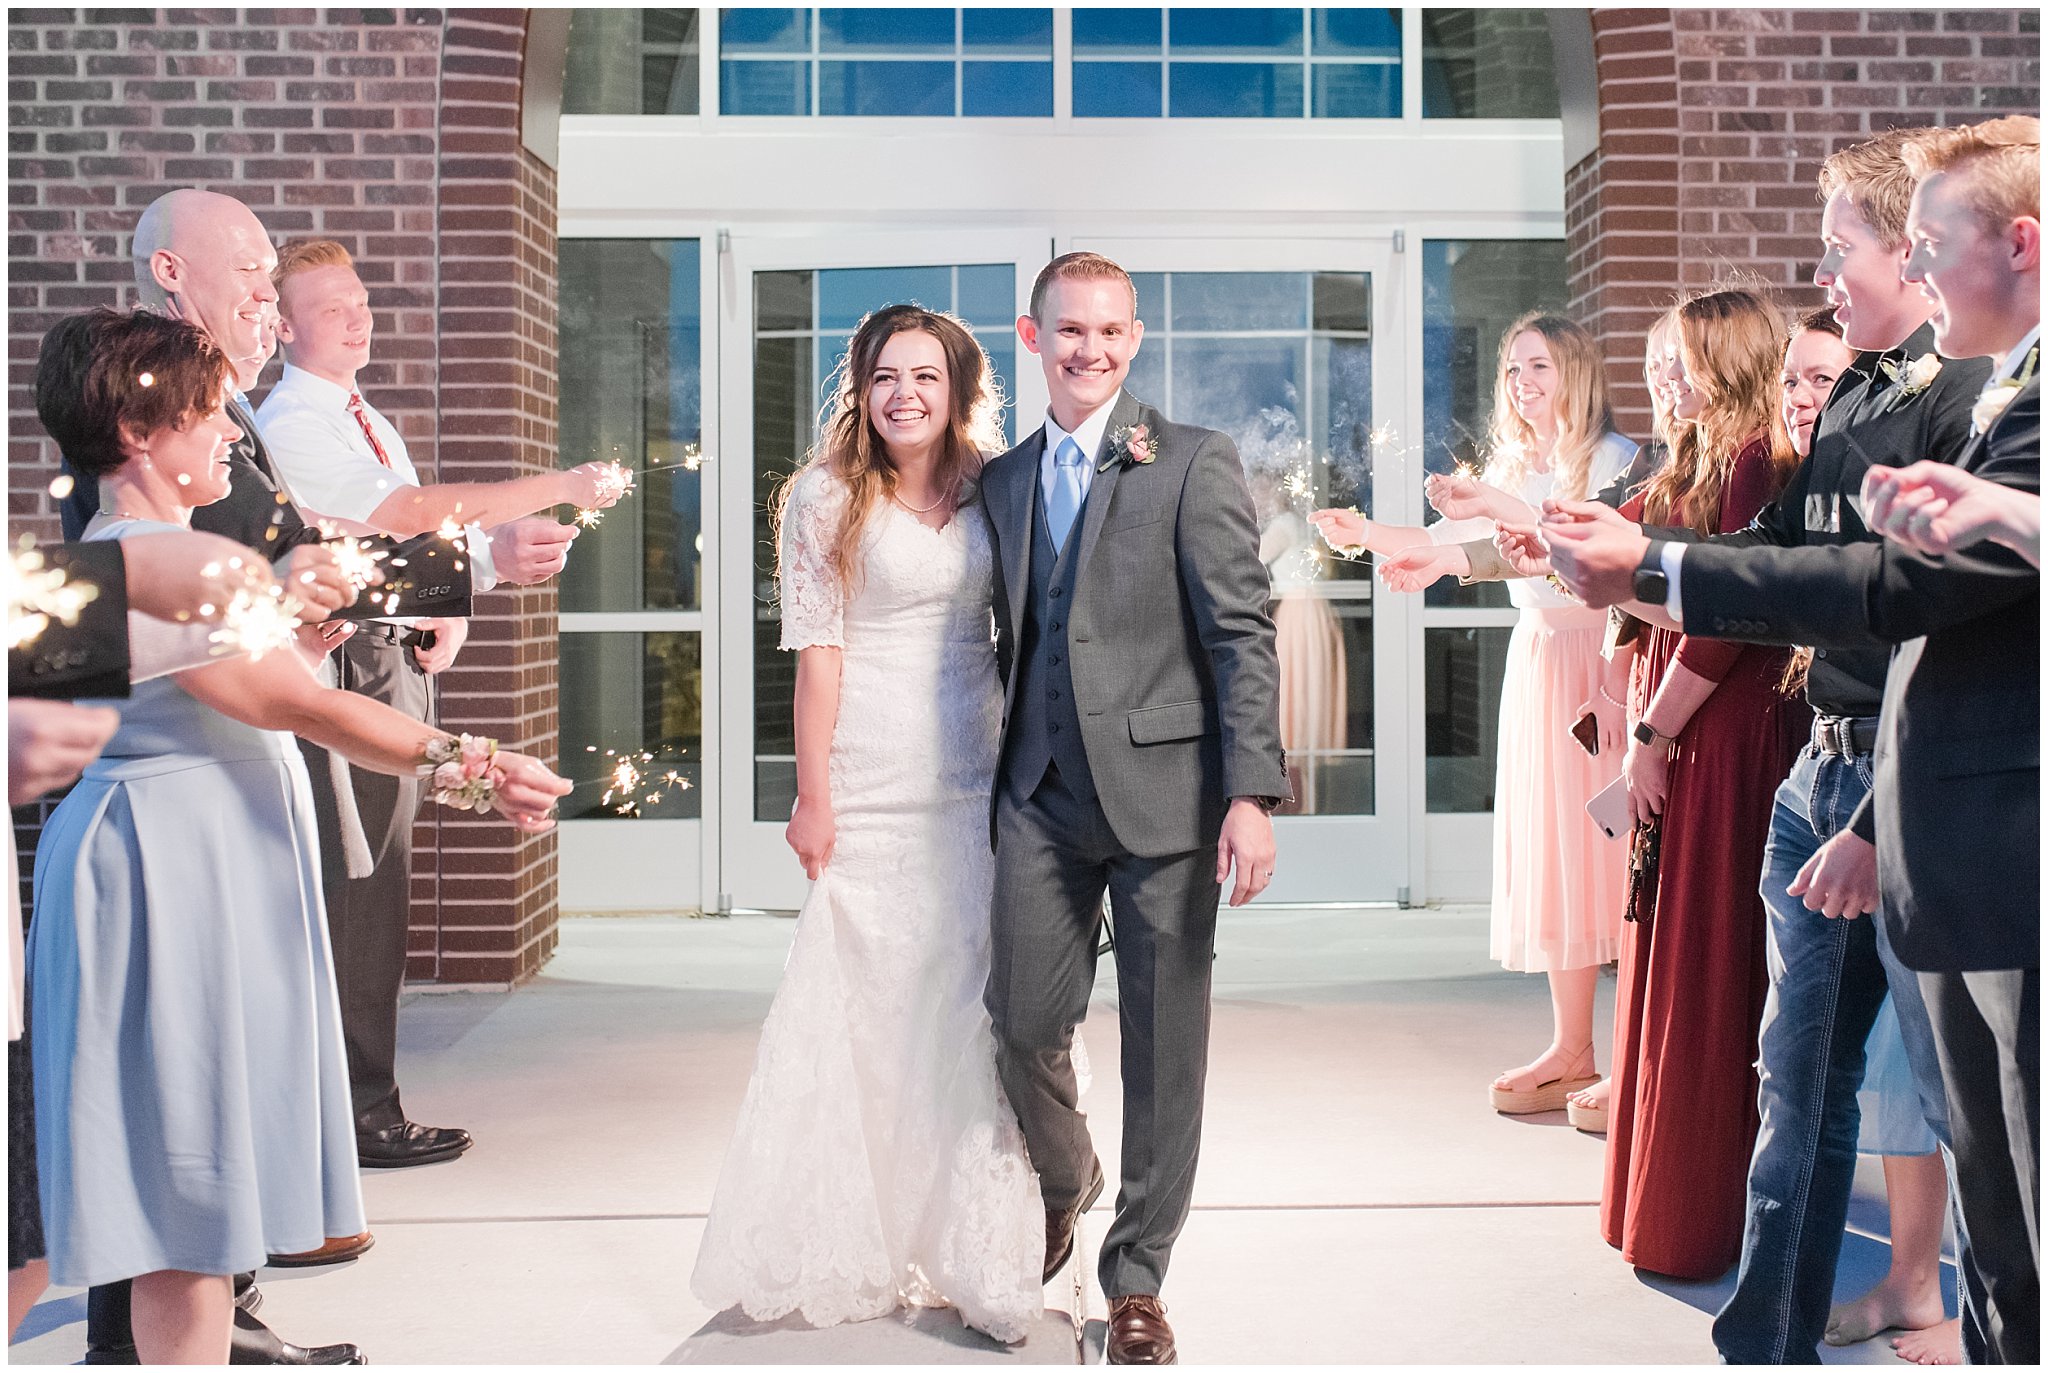 Bride and groom during sparkler exit | Utah wedding reception | Jessie and Dallin Photography